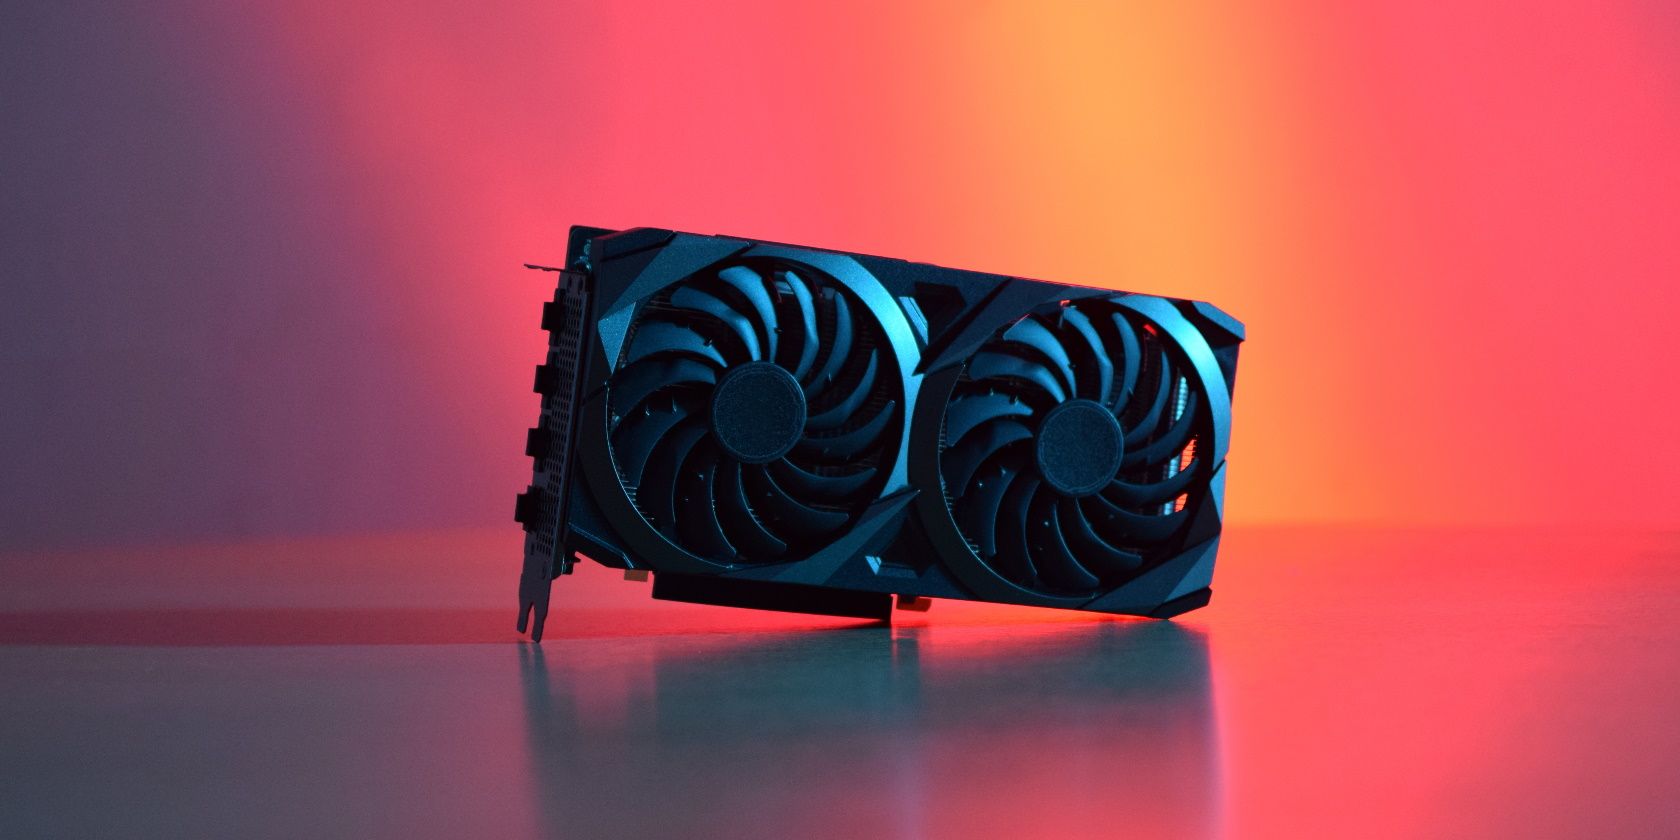 Black graphics card with two fans, on a wooden table, with red and blue lighting